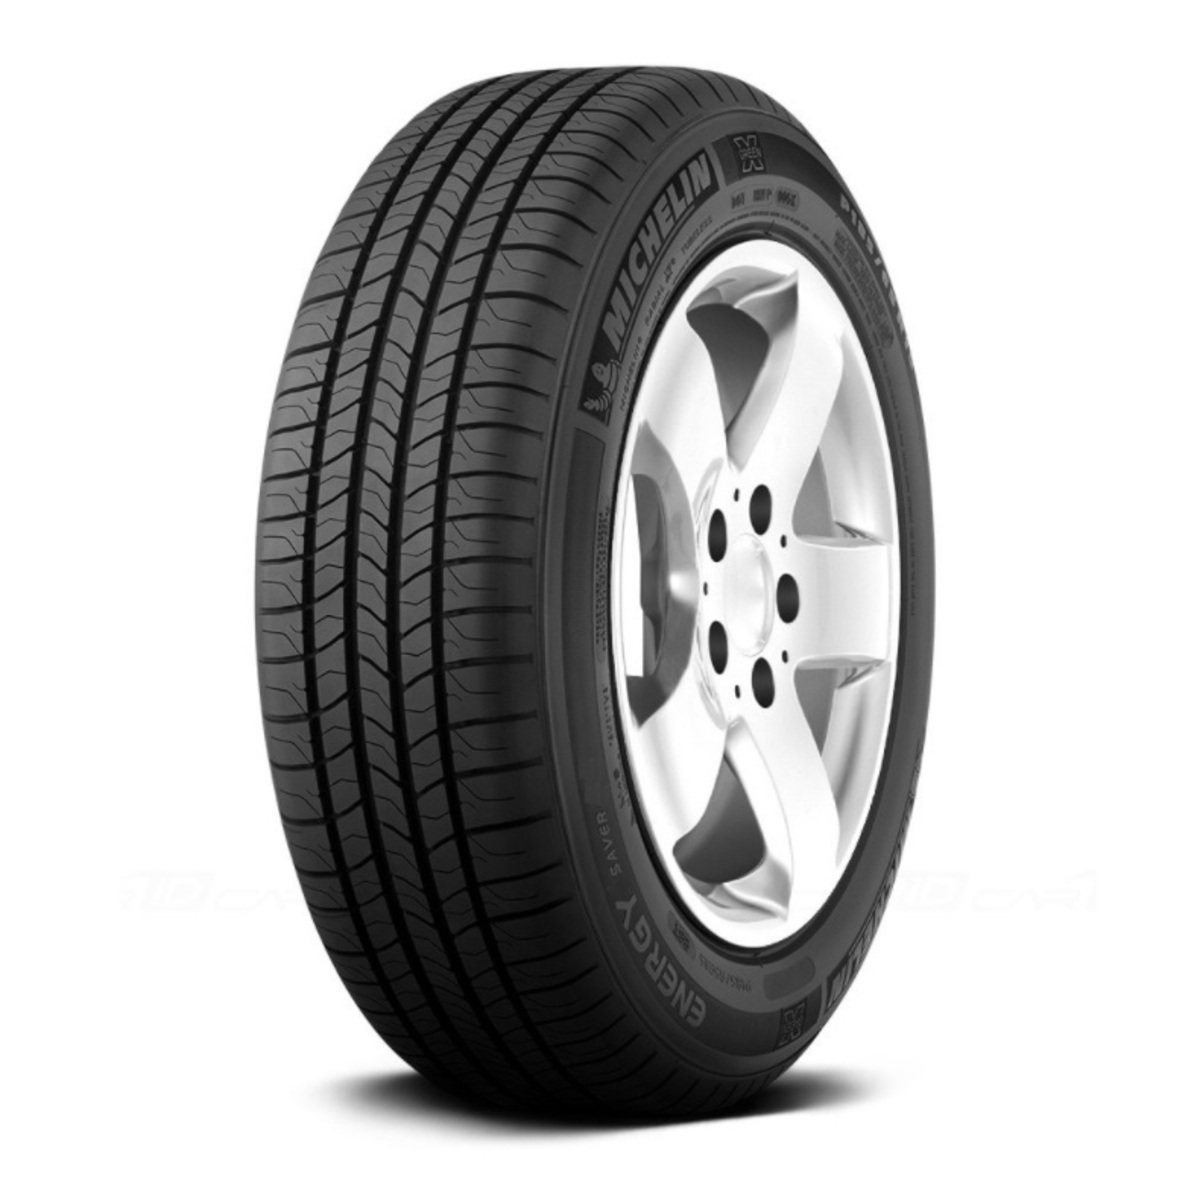 Michelin Energy Saver - Tyre Reviews and Tests